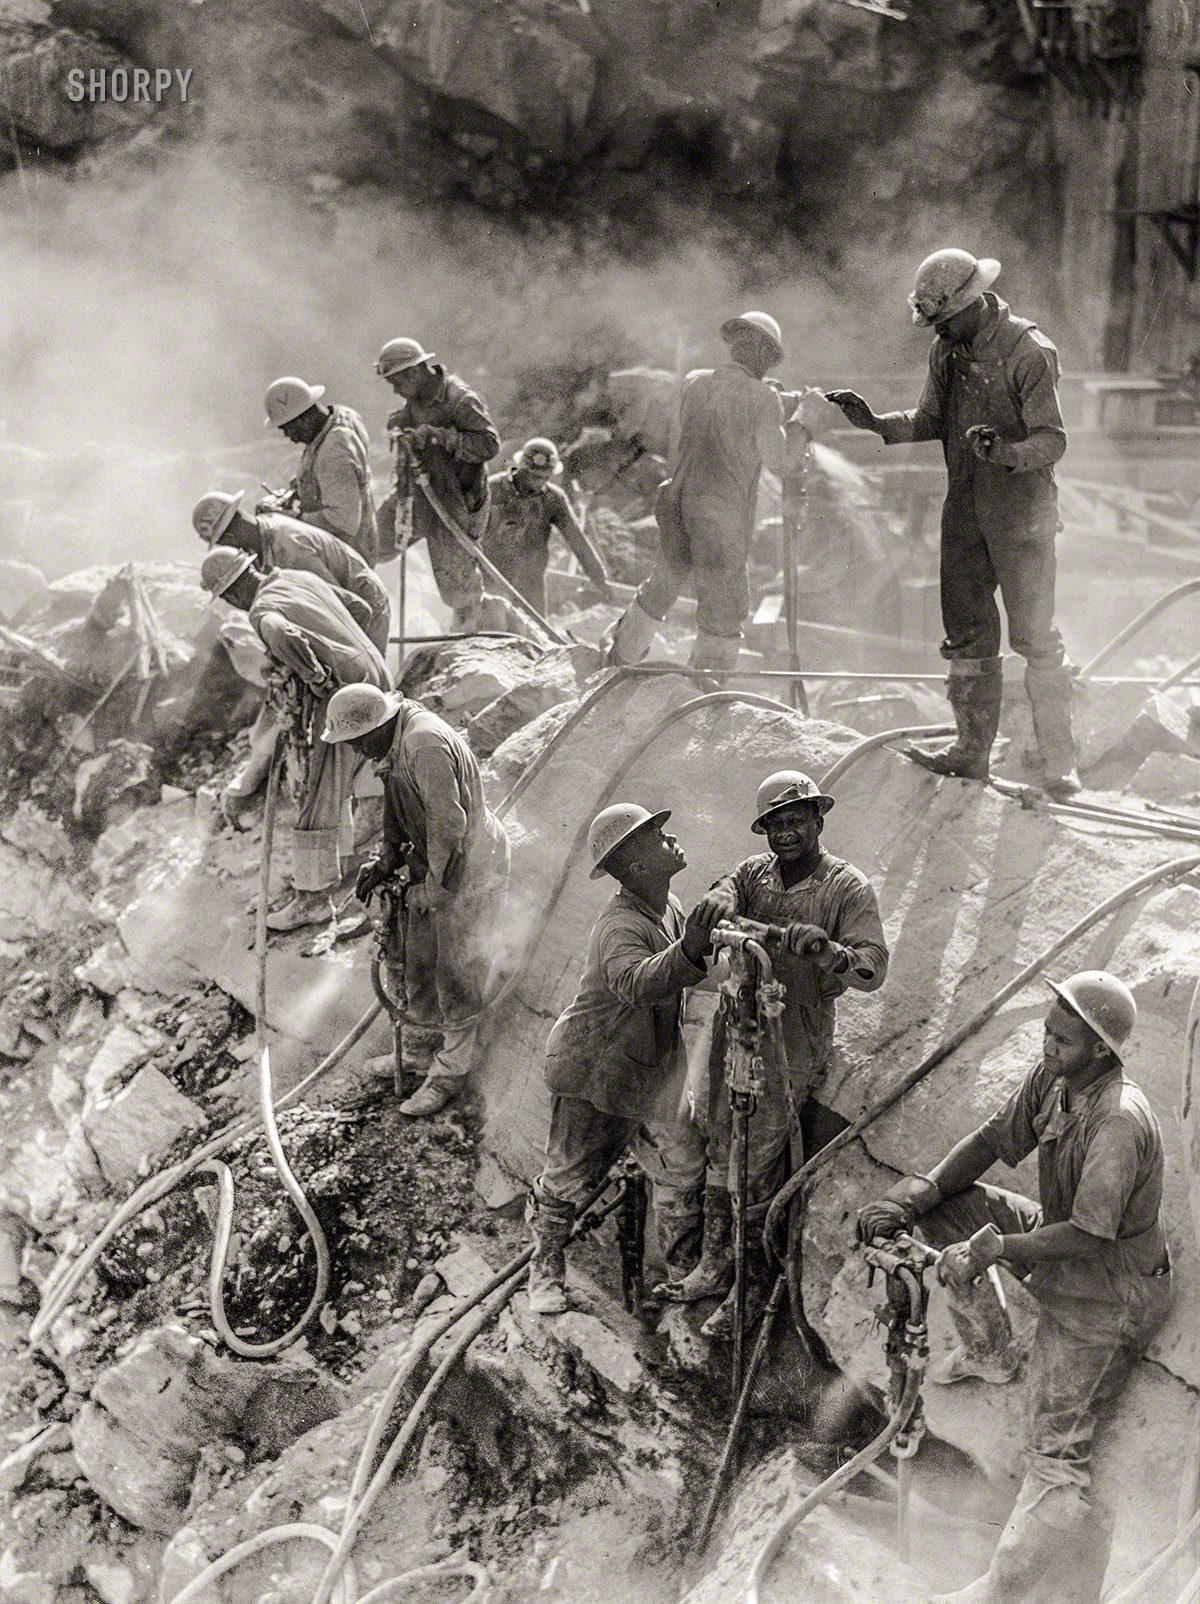 August 1942. "Fort Loudoun Dam -- Tennessee Valley Authority drillers." Photo by Jack Delano for the Office of War Information. View full size.